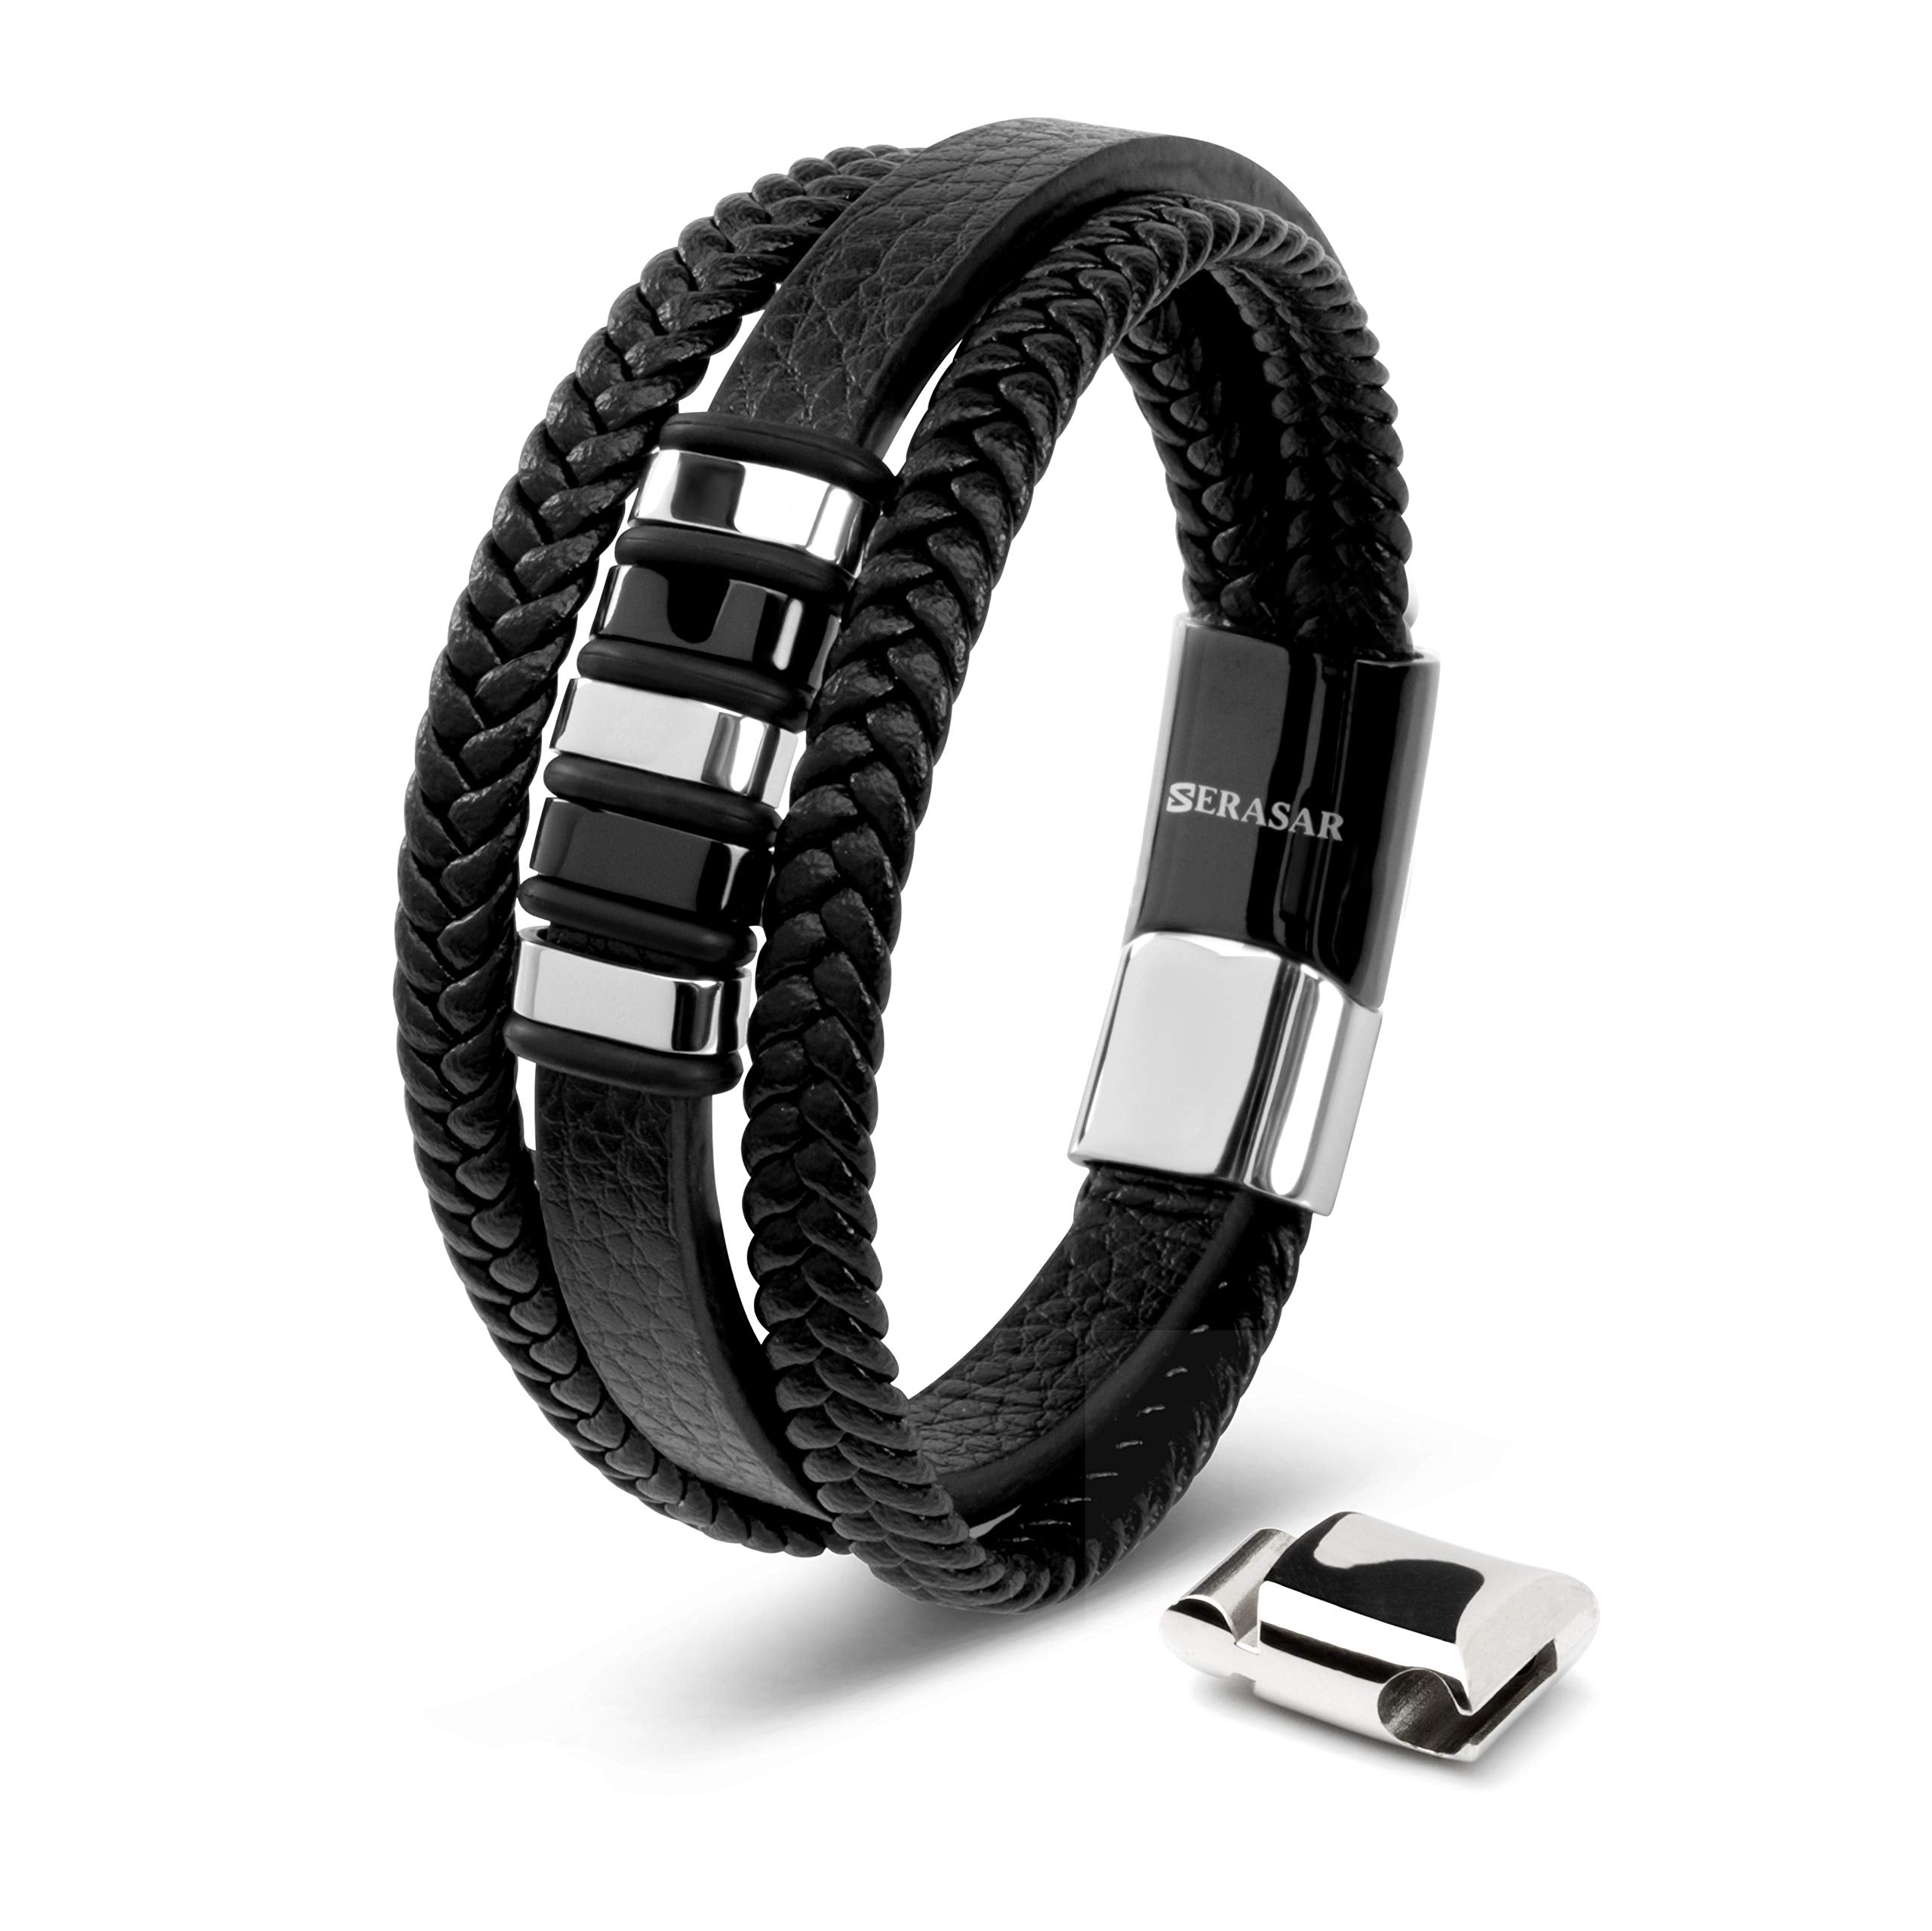 SERASAR | Premium Genuine Leather Bracelet for Men in Black | Magnetic Stainless Steel Clasp in Silver and Gold | Exclusive Jewellery Box | Great Gift Idea